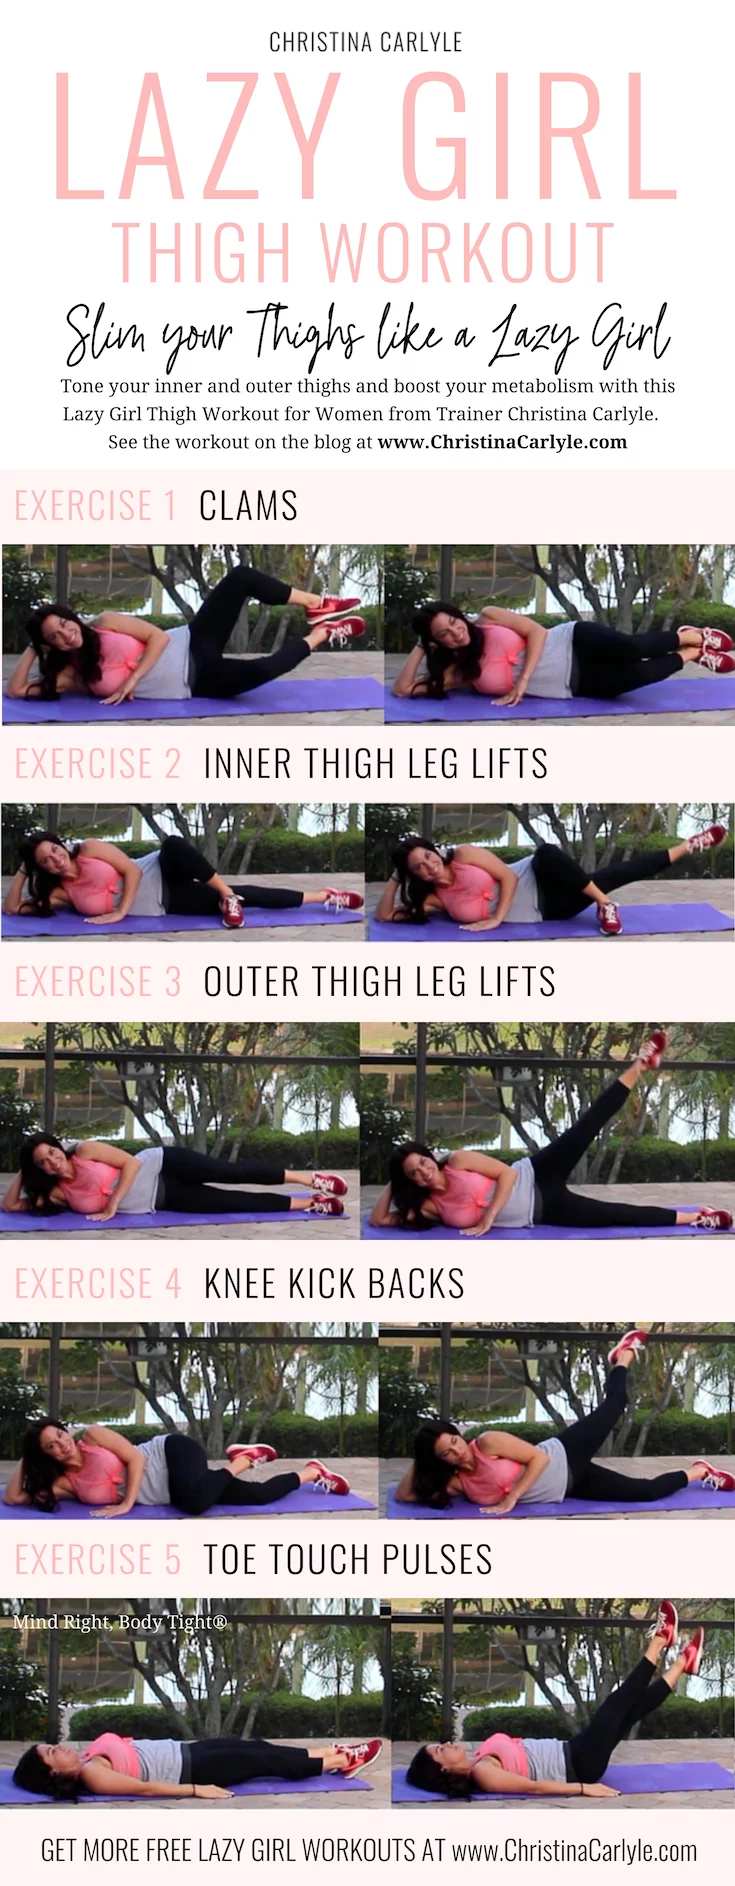 Lazy Girl Thigh Workout Christina Carlyle